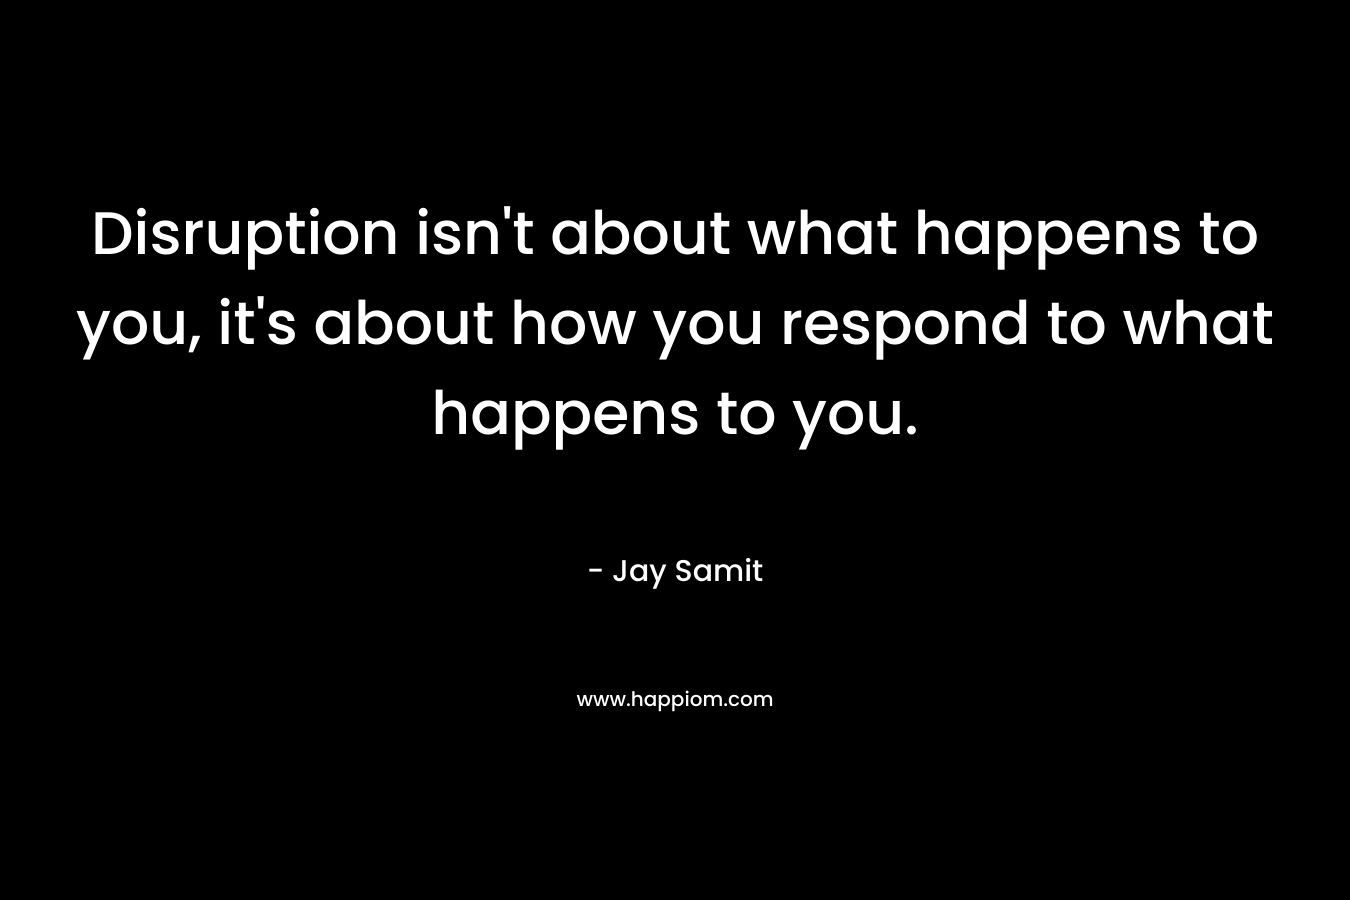 Disruption isn’t about what happens to you, it’s about how you respond to what happens to you. – Jay Samit